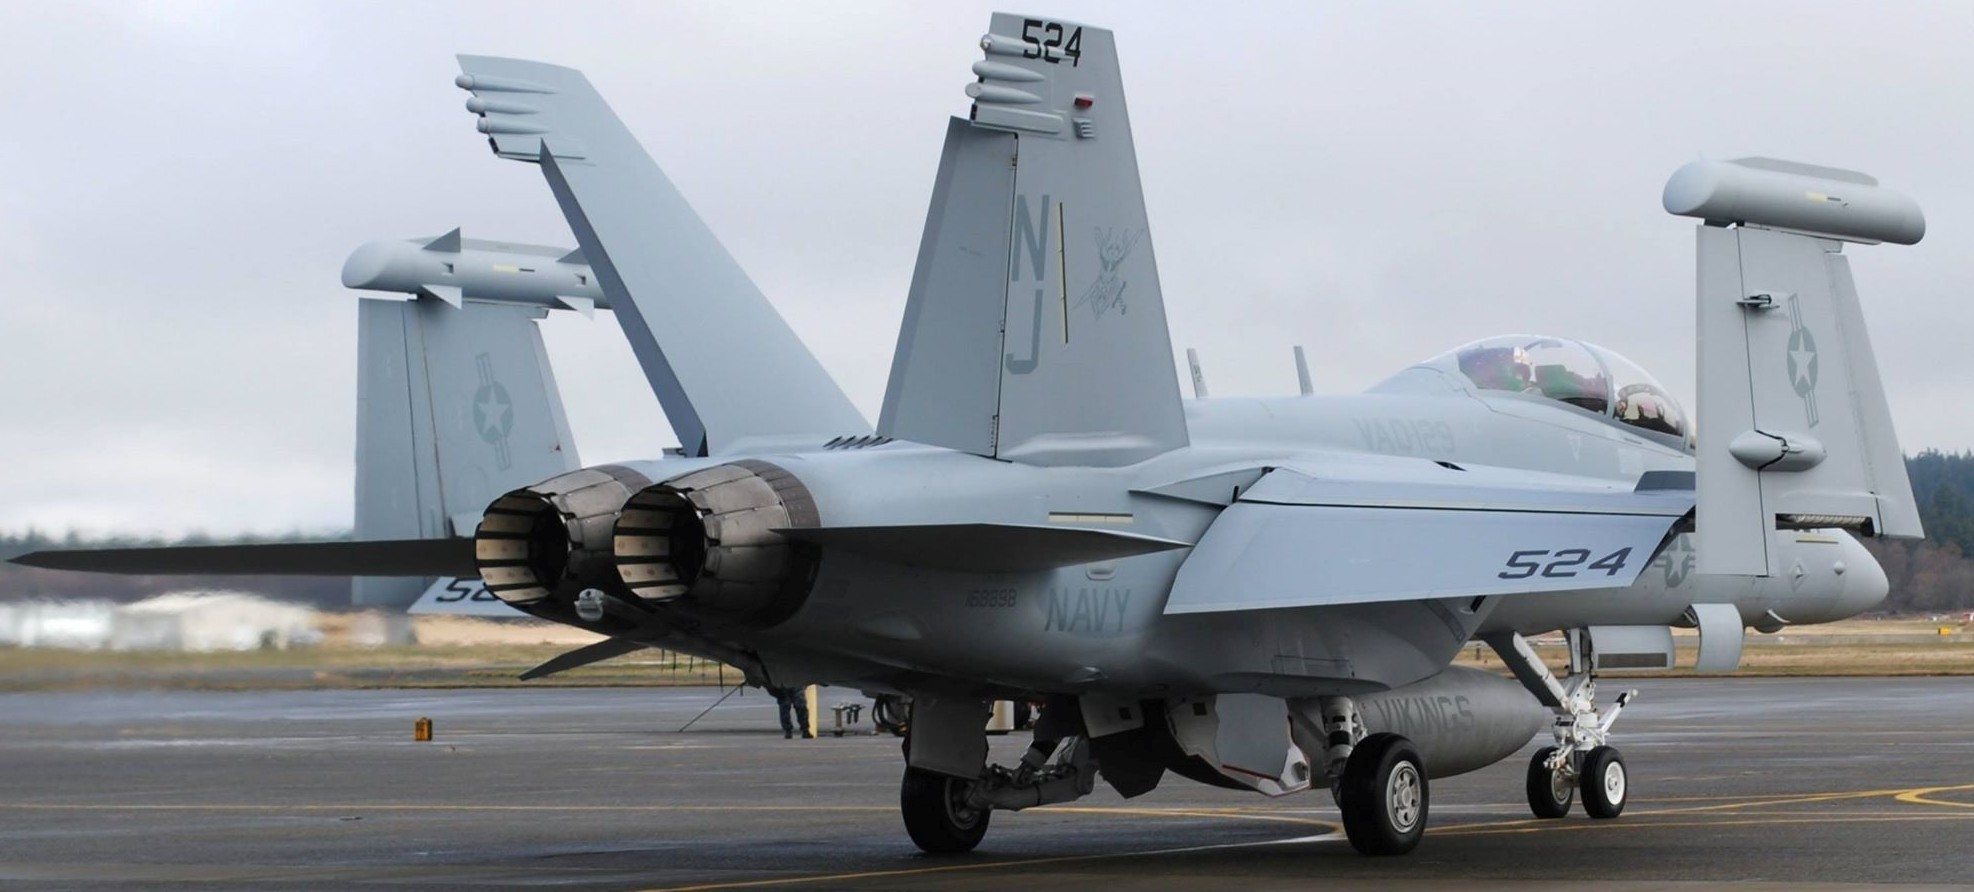 vaq-129 vikings electronic attack squadron fleet replacement frs us navy ea-18g growler 89